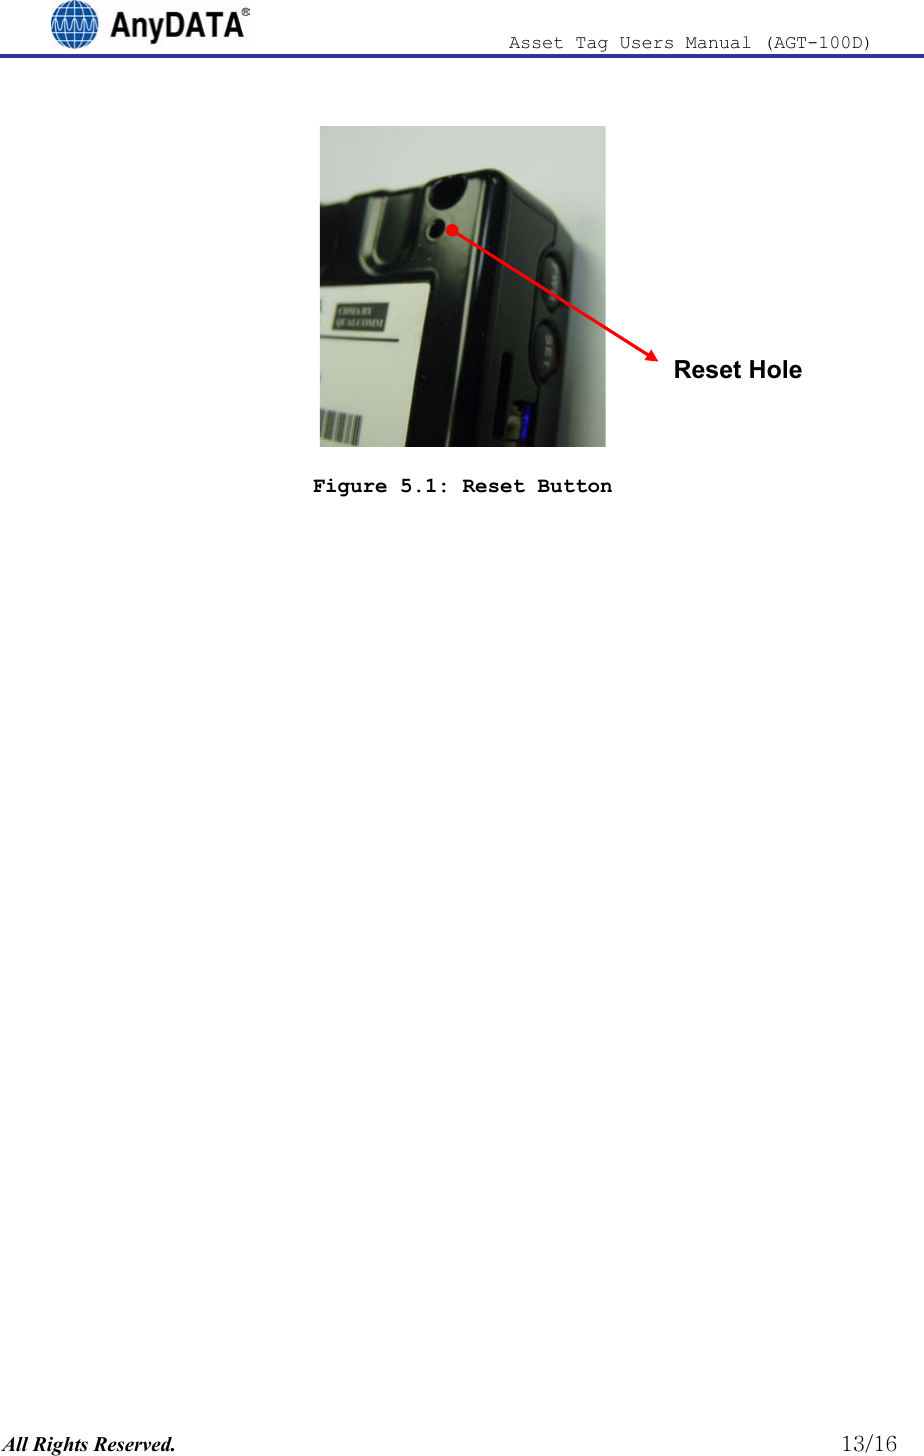                              Asset Tag  Users  Manual  (AGT-100D)   Reset Hole Figure 5.1: Reset Button All Rights Reserved.                                                          13/16 